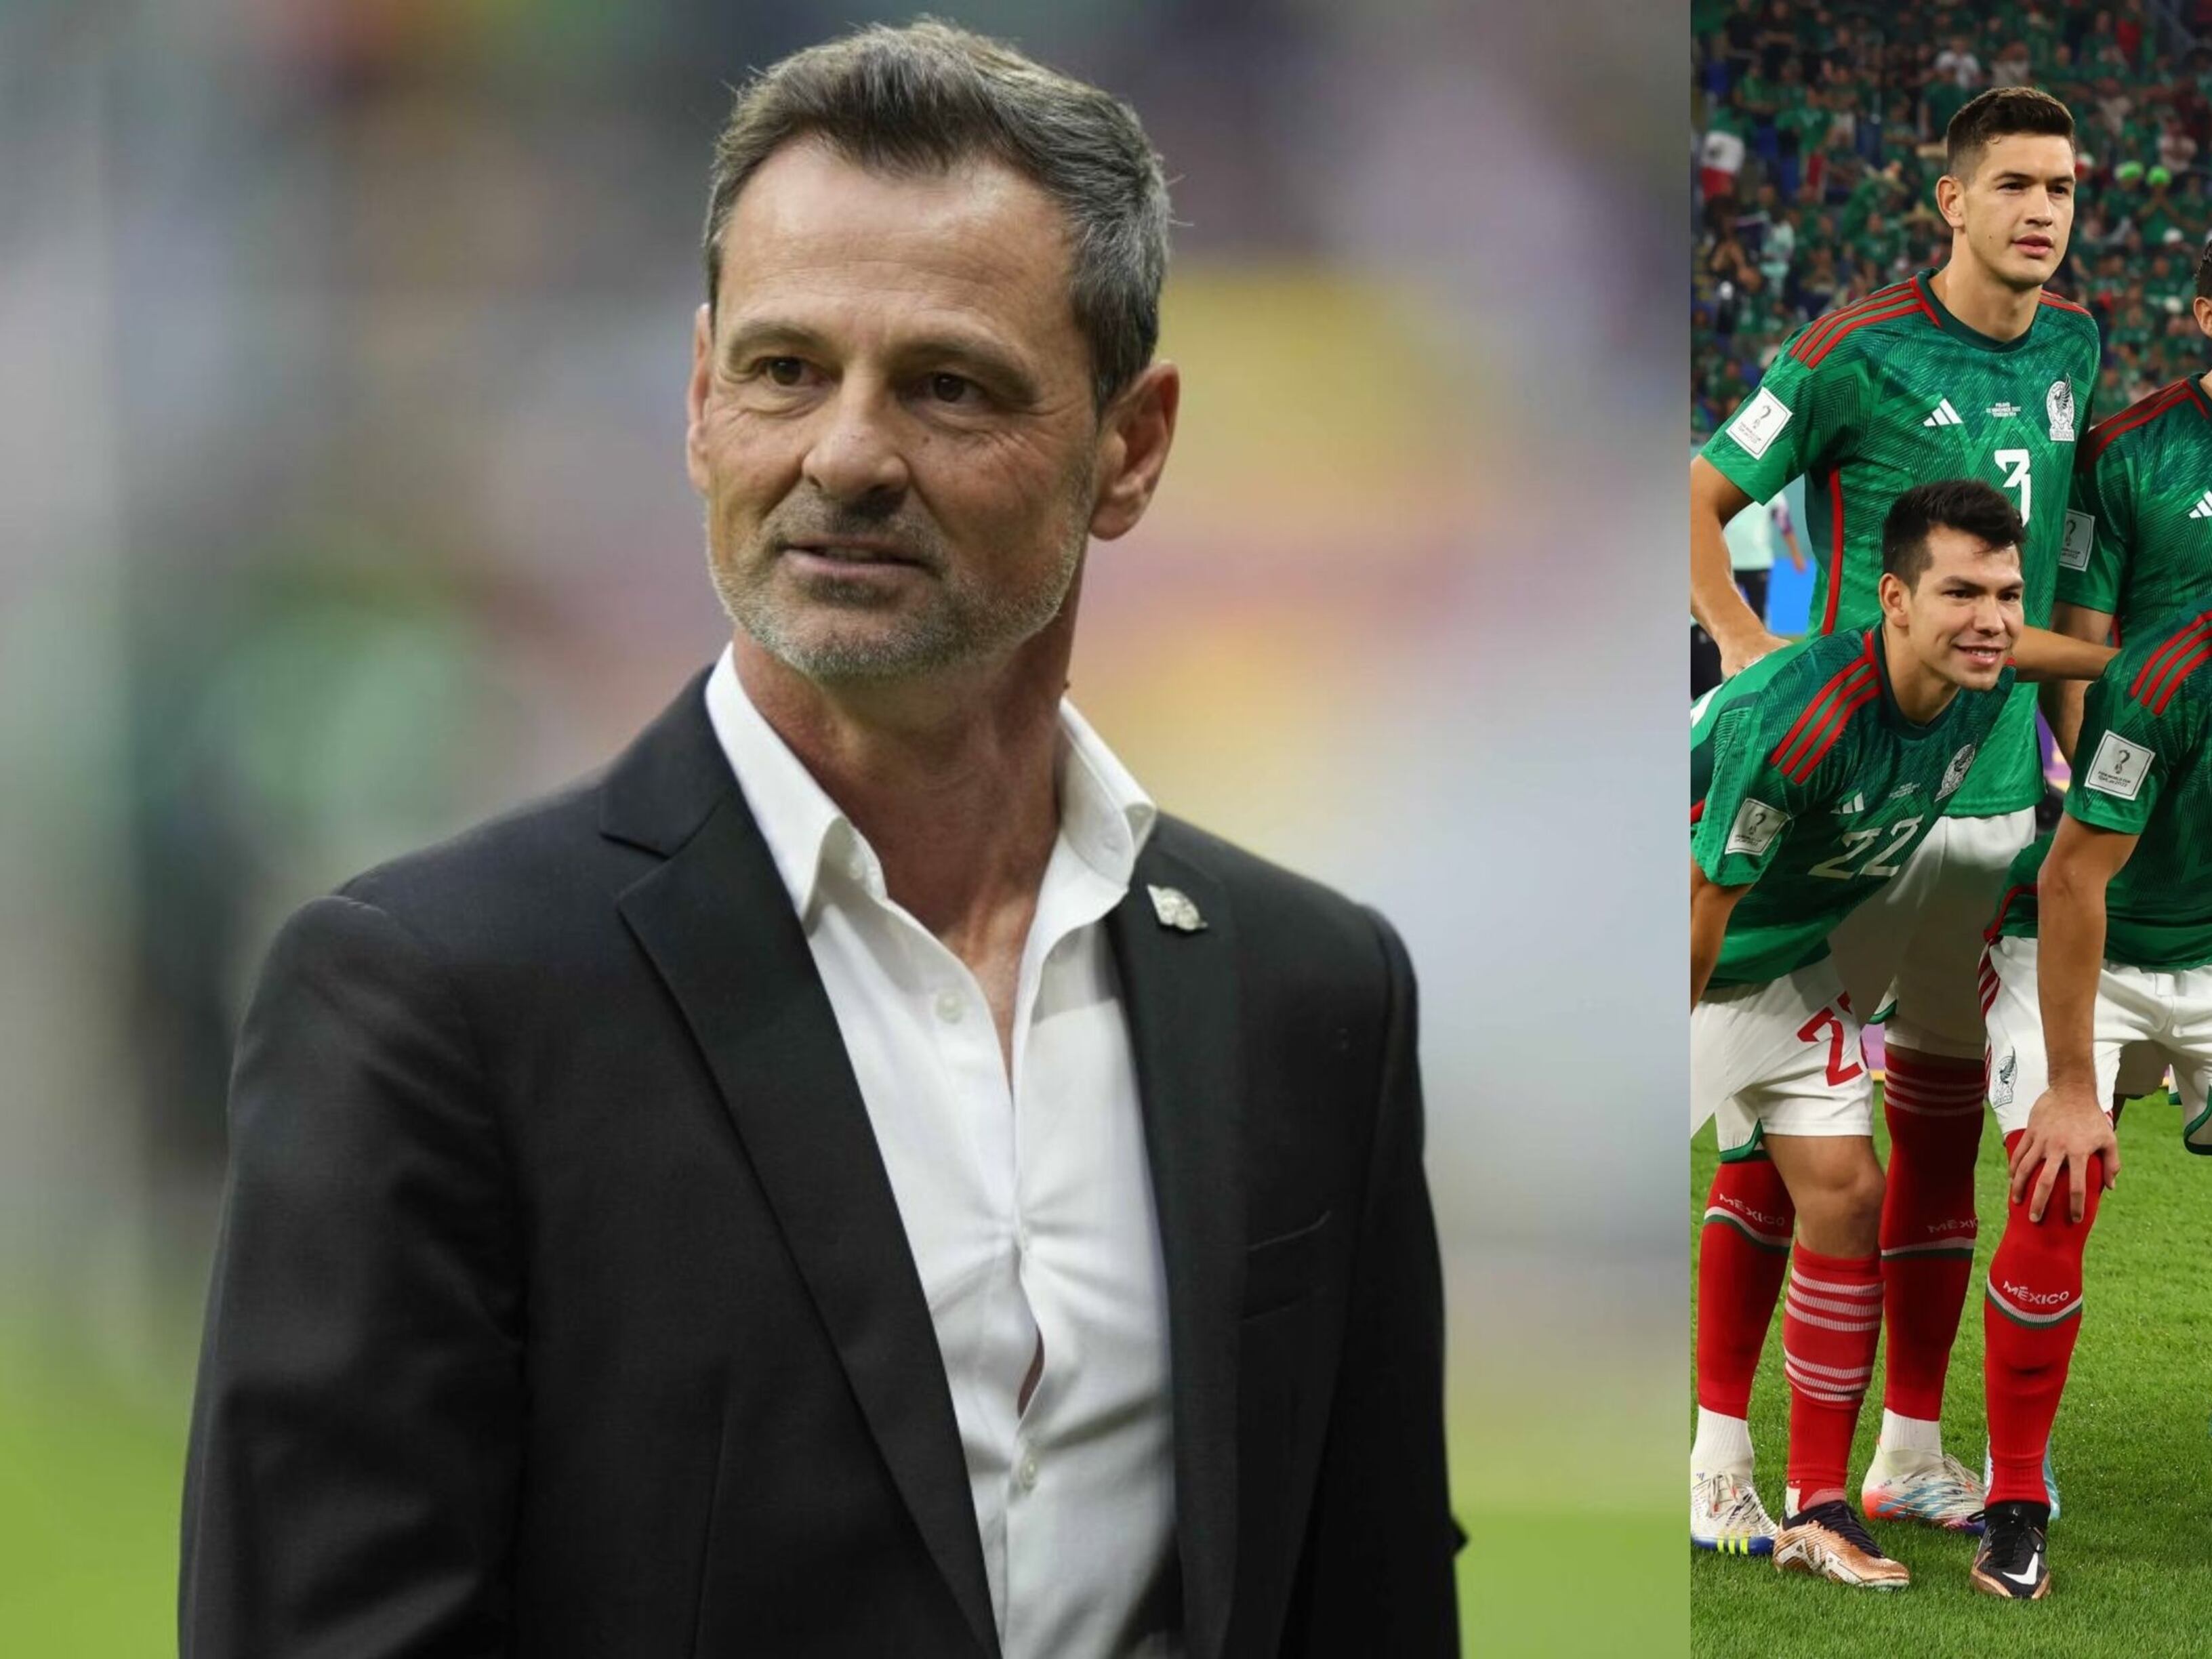 Cocca did not want him in the Mexican National Team, he made a serious mistake